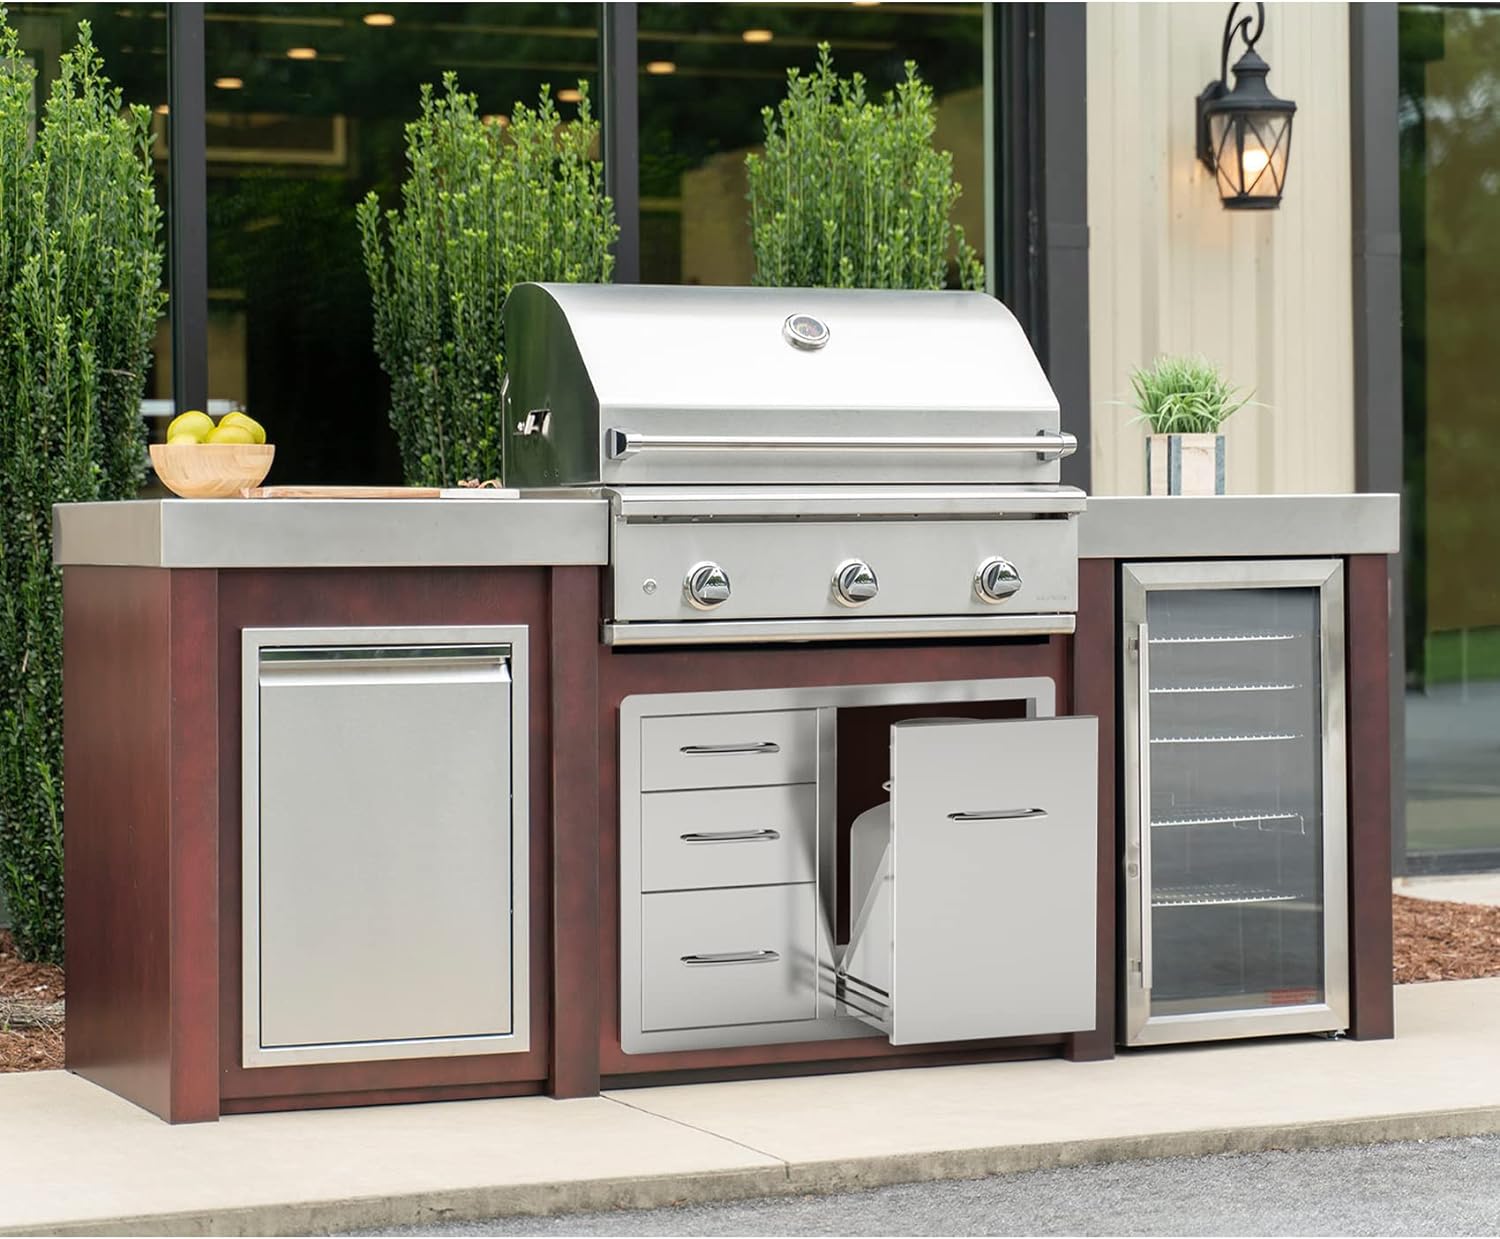 Stanbroil Outdoor Kitchen Stainless Steel Combo Propane Tank Tray, 30-Inch - $375